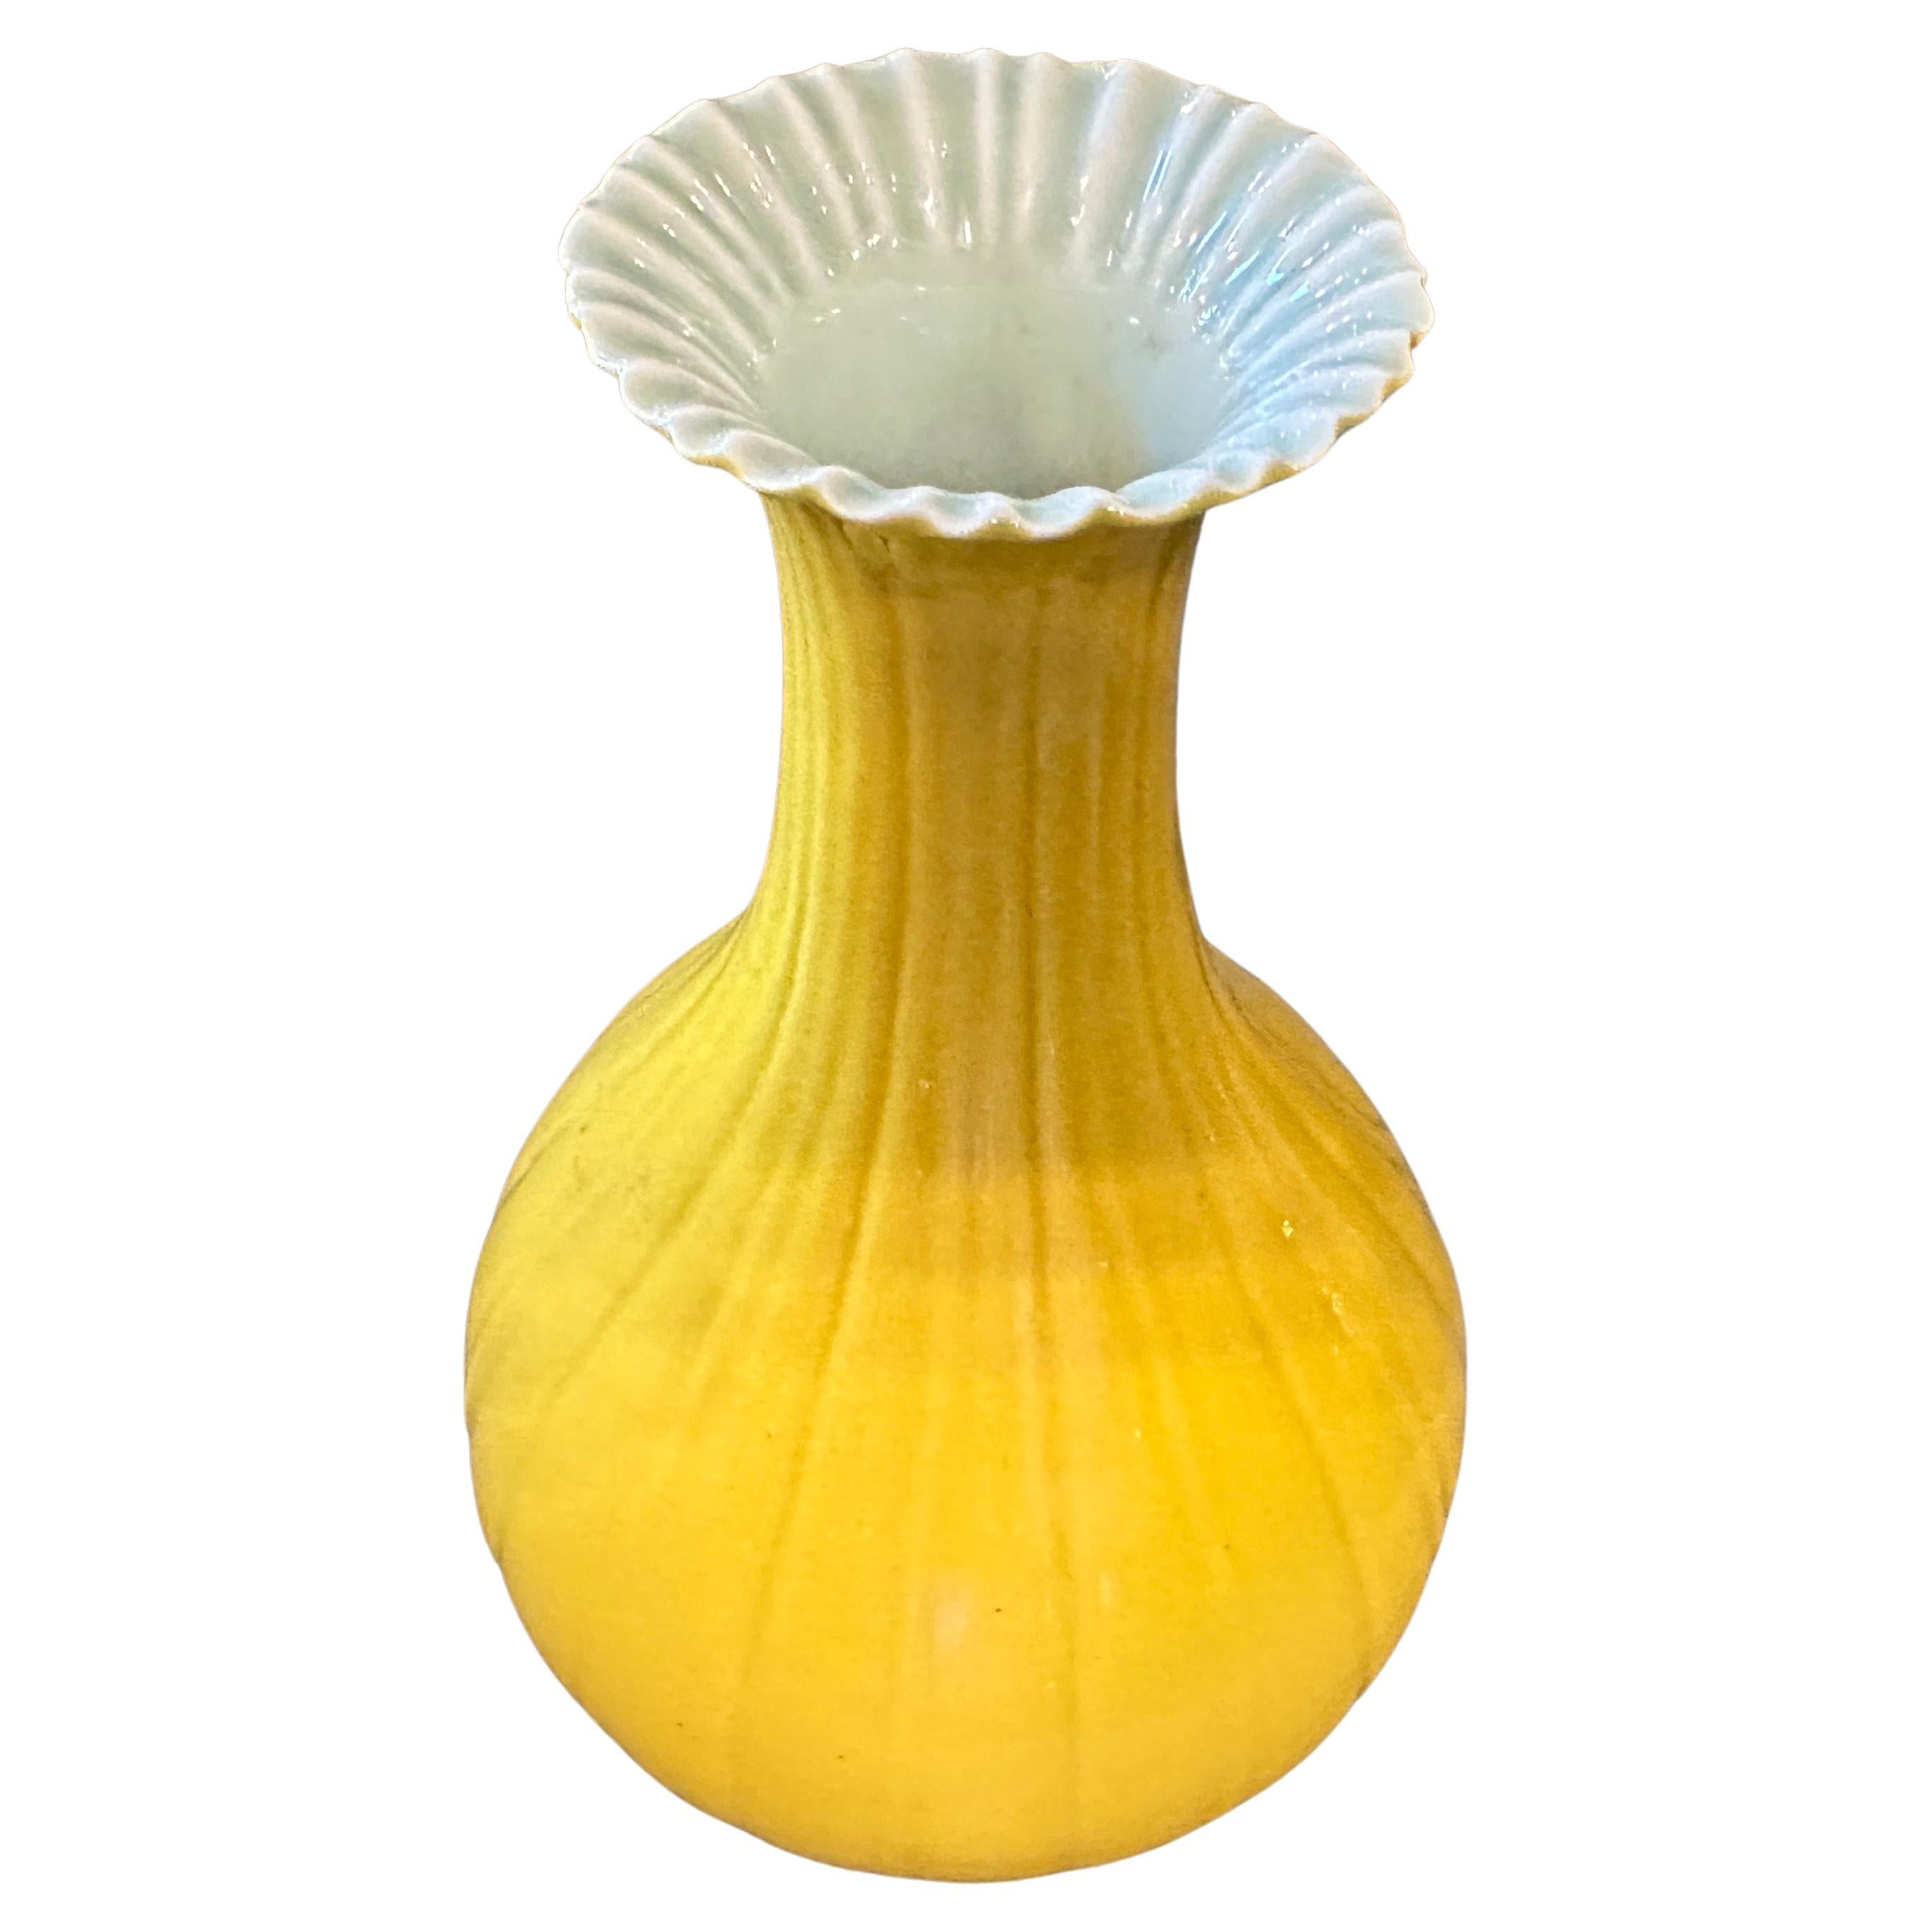 A perfect conditions yellow glazed porcelain vase manufactured in China in the early 20th century. It showcases exquisite craftsmanship and attention to detail. The vibrant yellow glaze covers the entire vase, giving it a captivating and lustrous